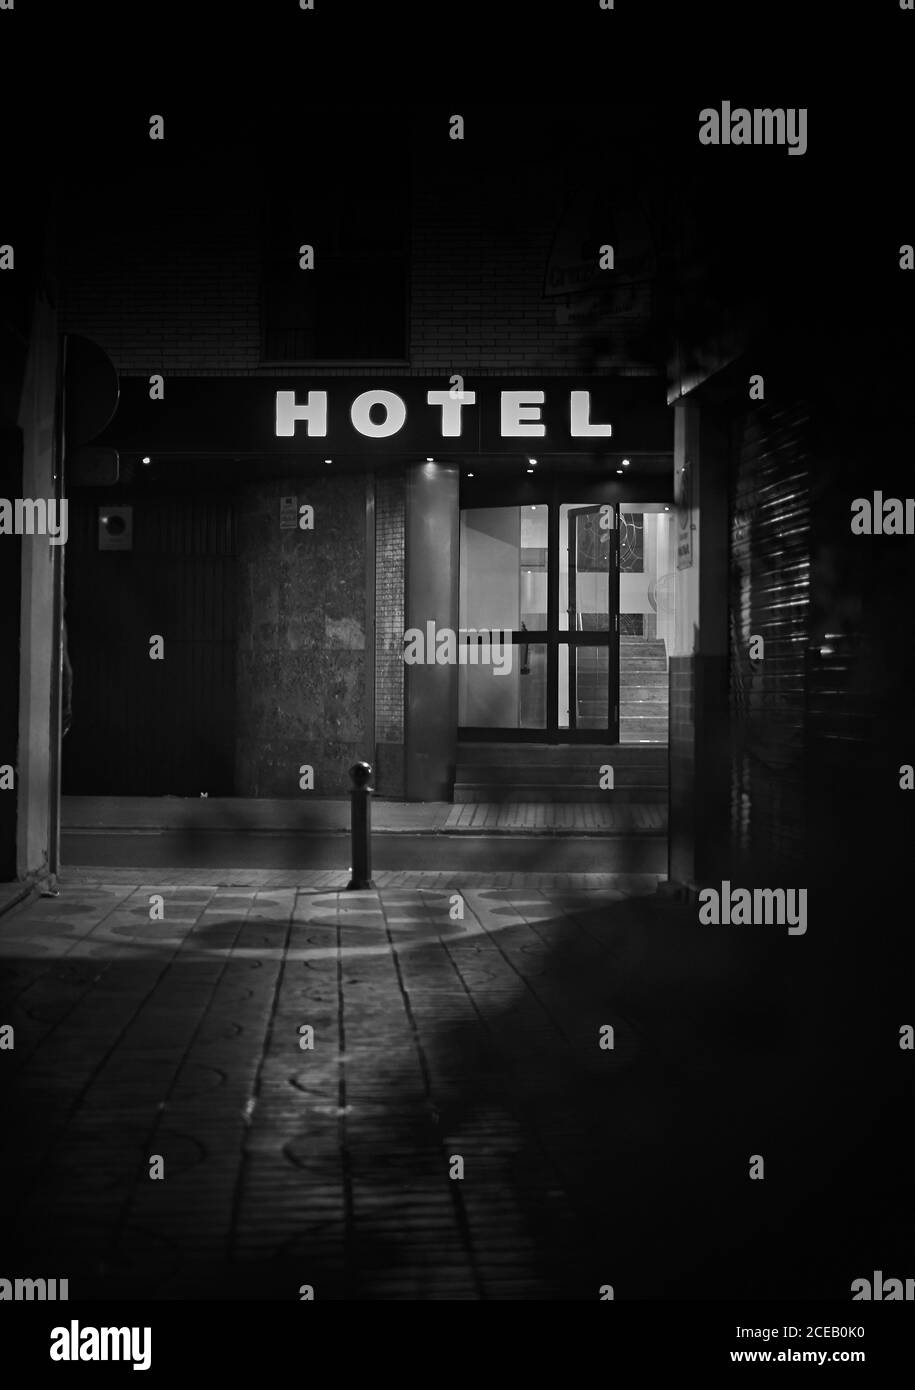 Porch and entrance glass door with burning Hotel sign above at night in black and white colors Stock Photo